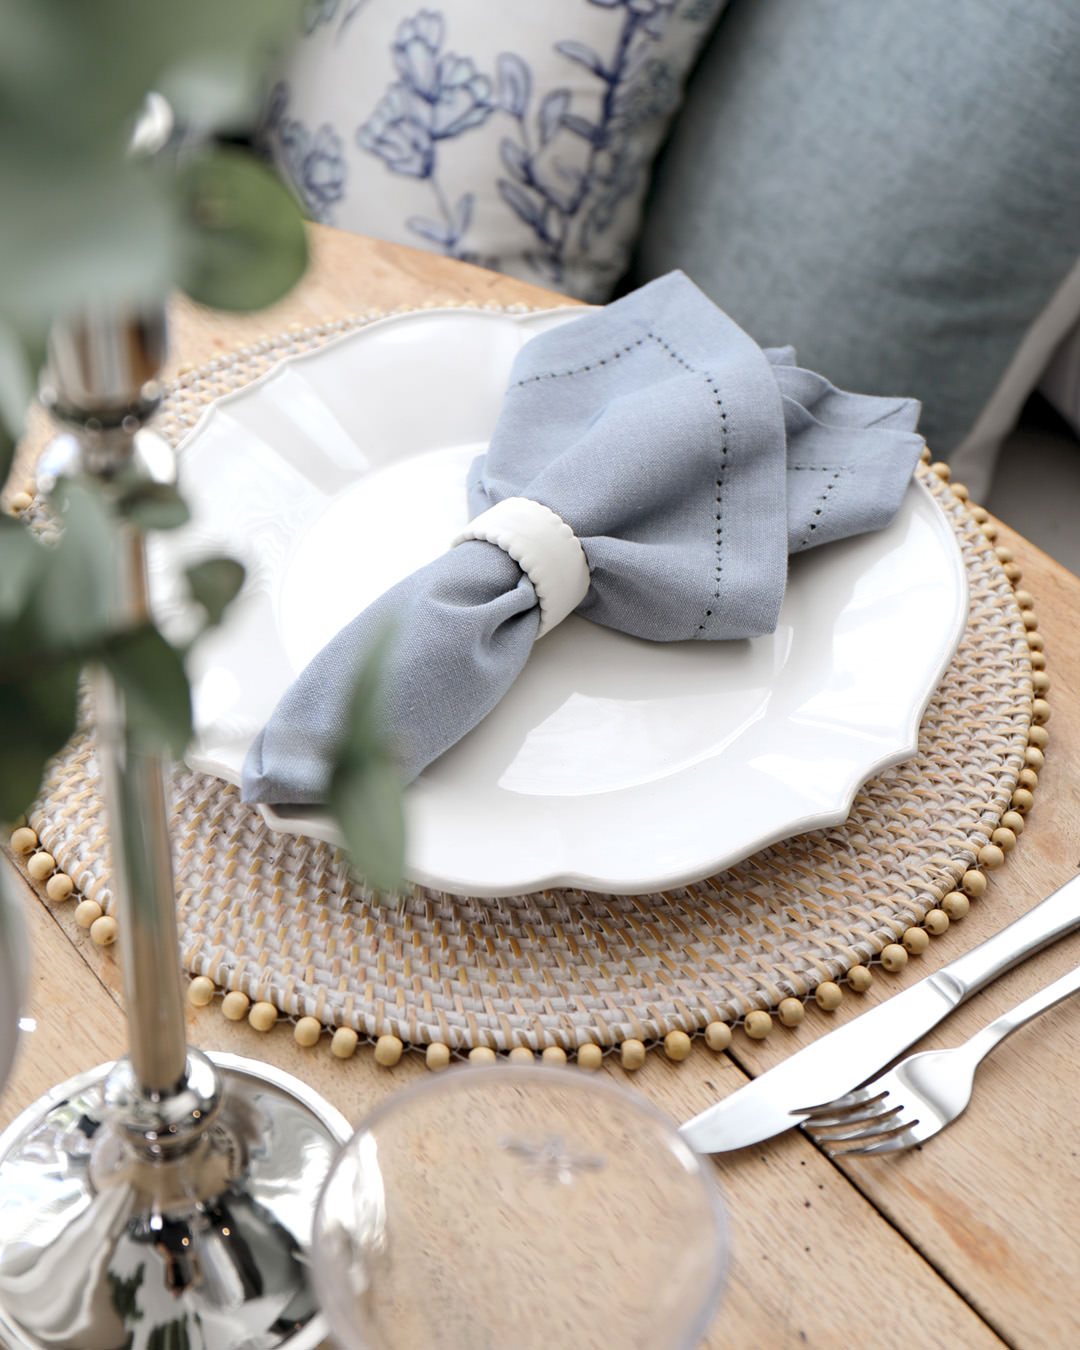 French Knot Dining & Tableware